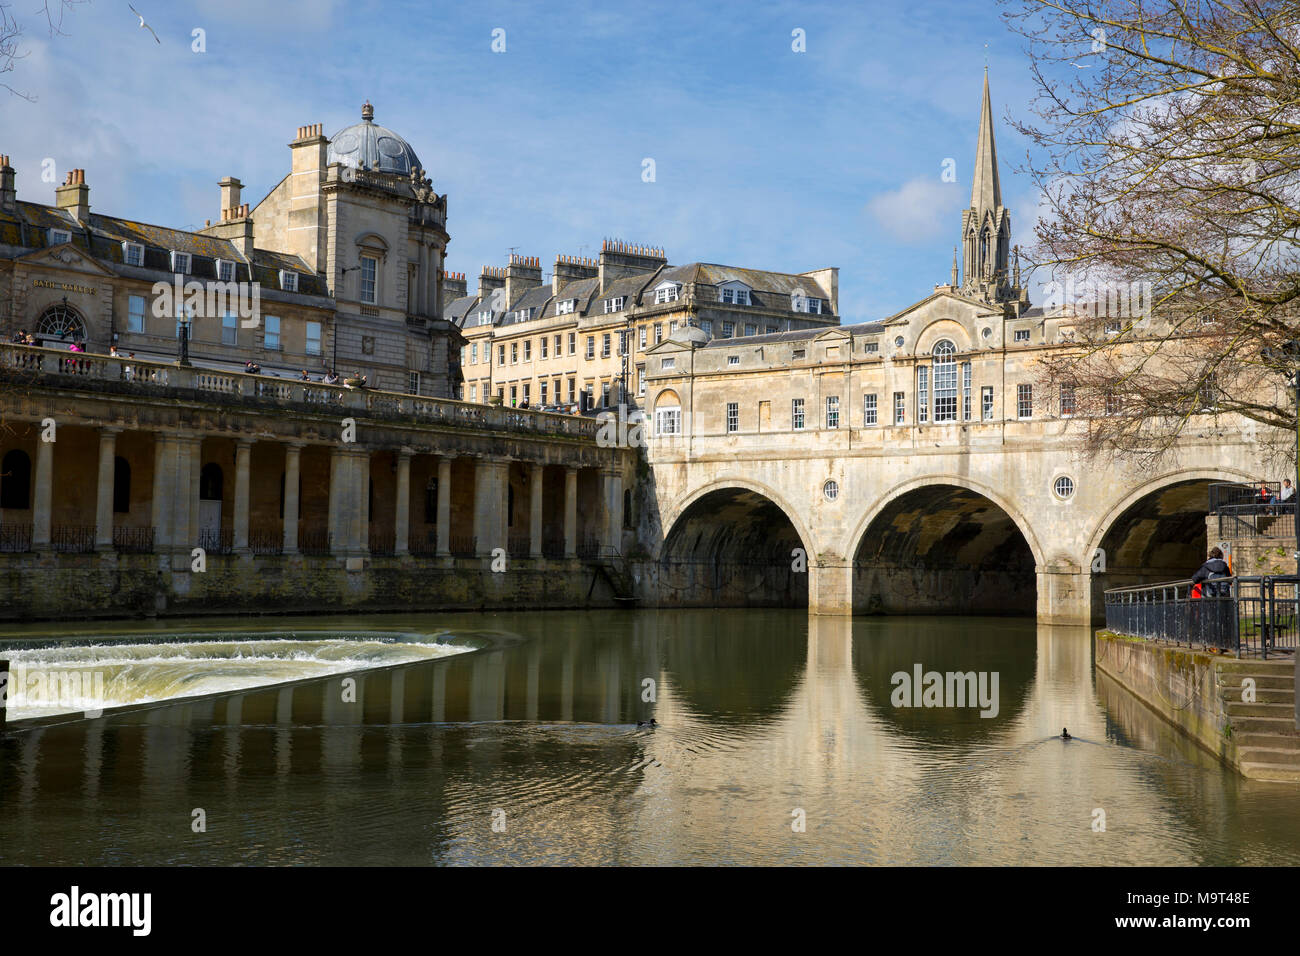 BATH, UK - 26 MARCH, 2018 : Great Pulteney Bridge, Pulteney Weir and the River Avon on a sunny spring day. Stock Photo